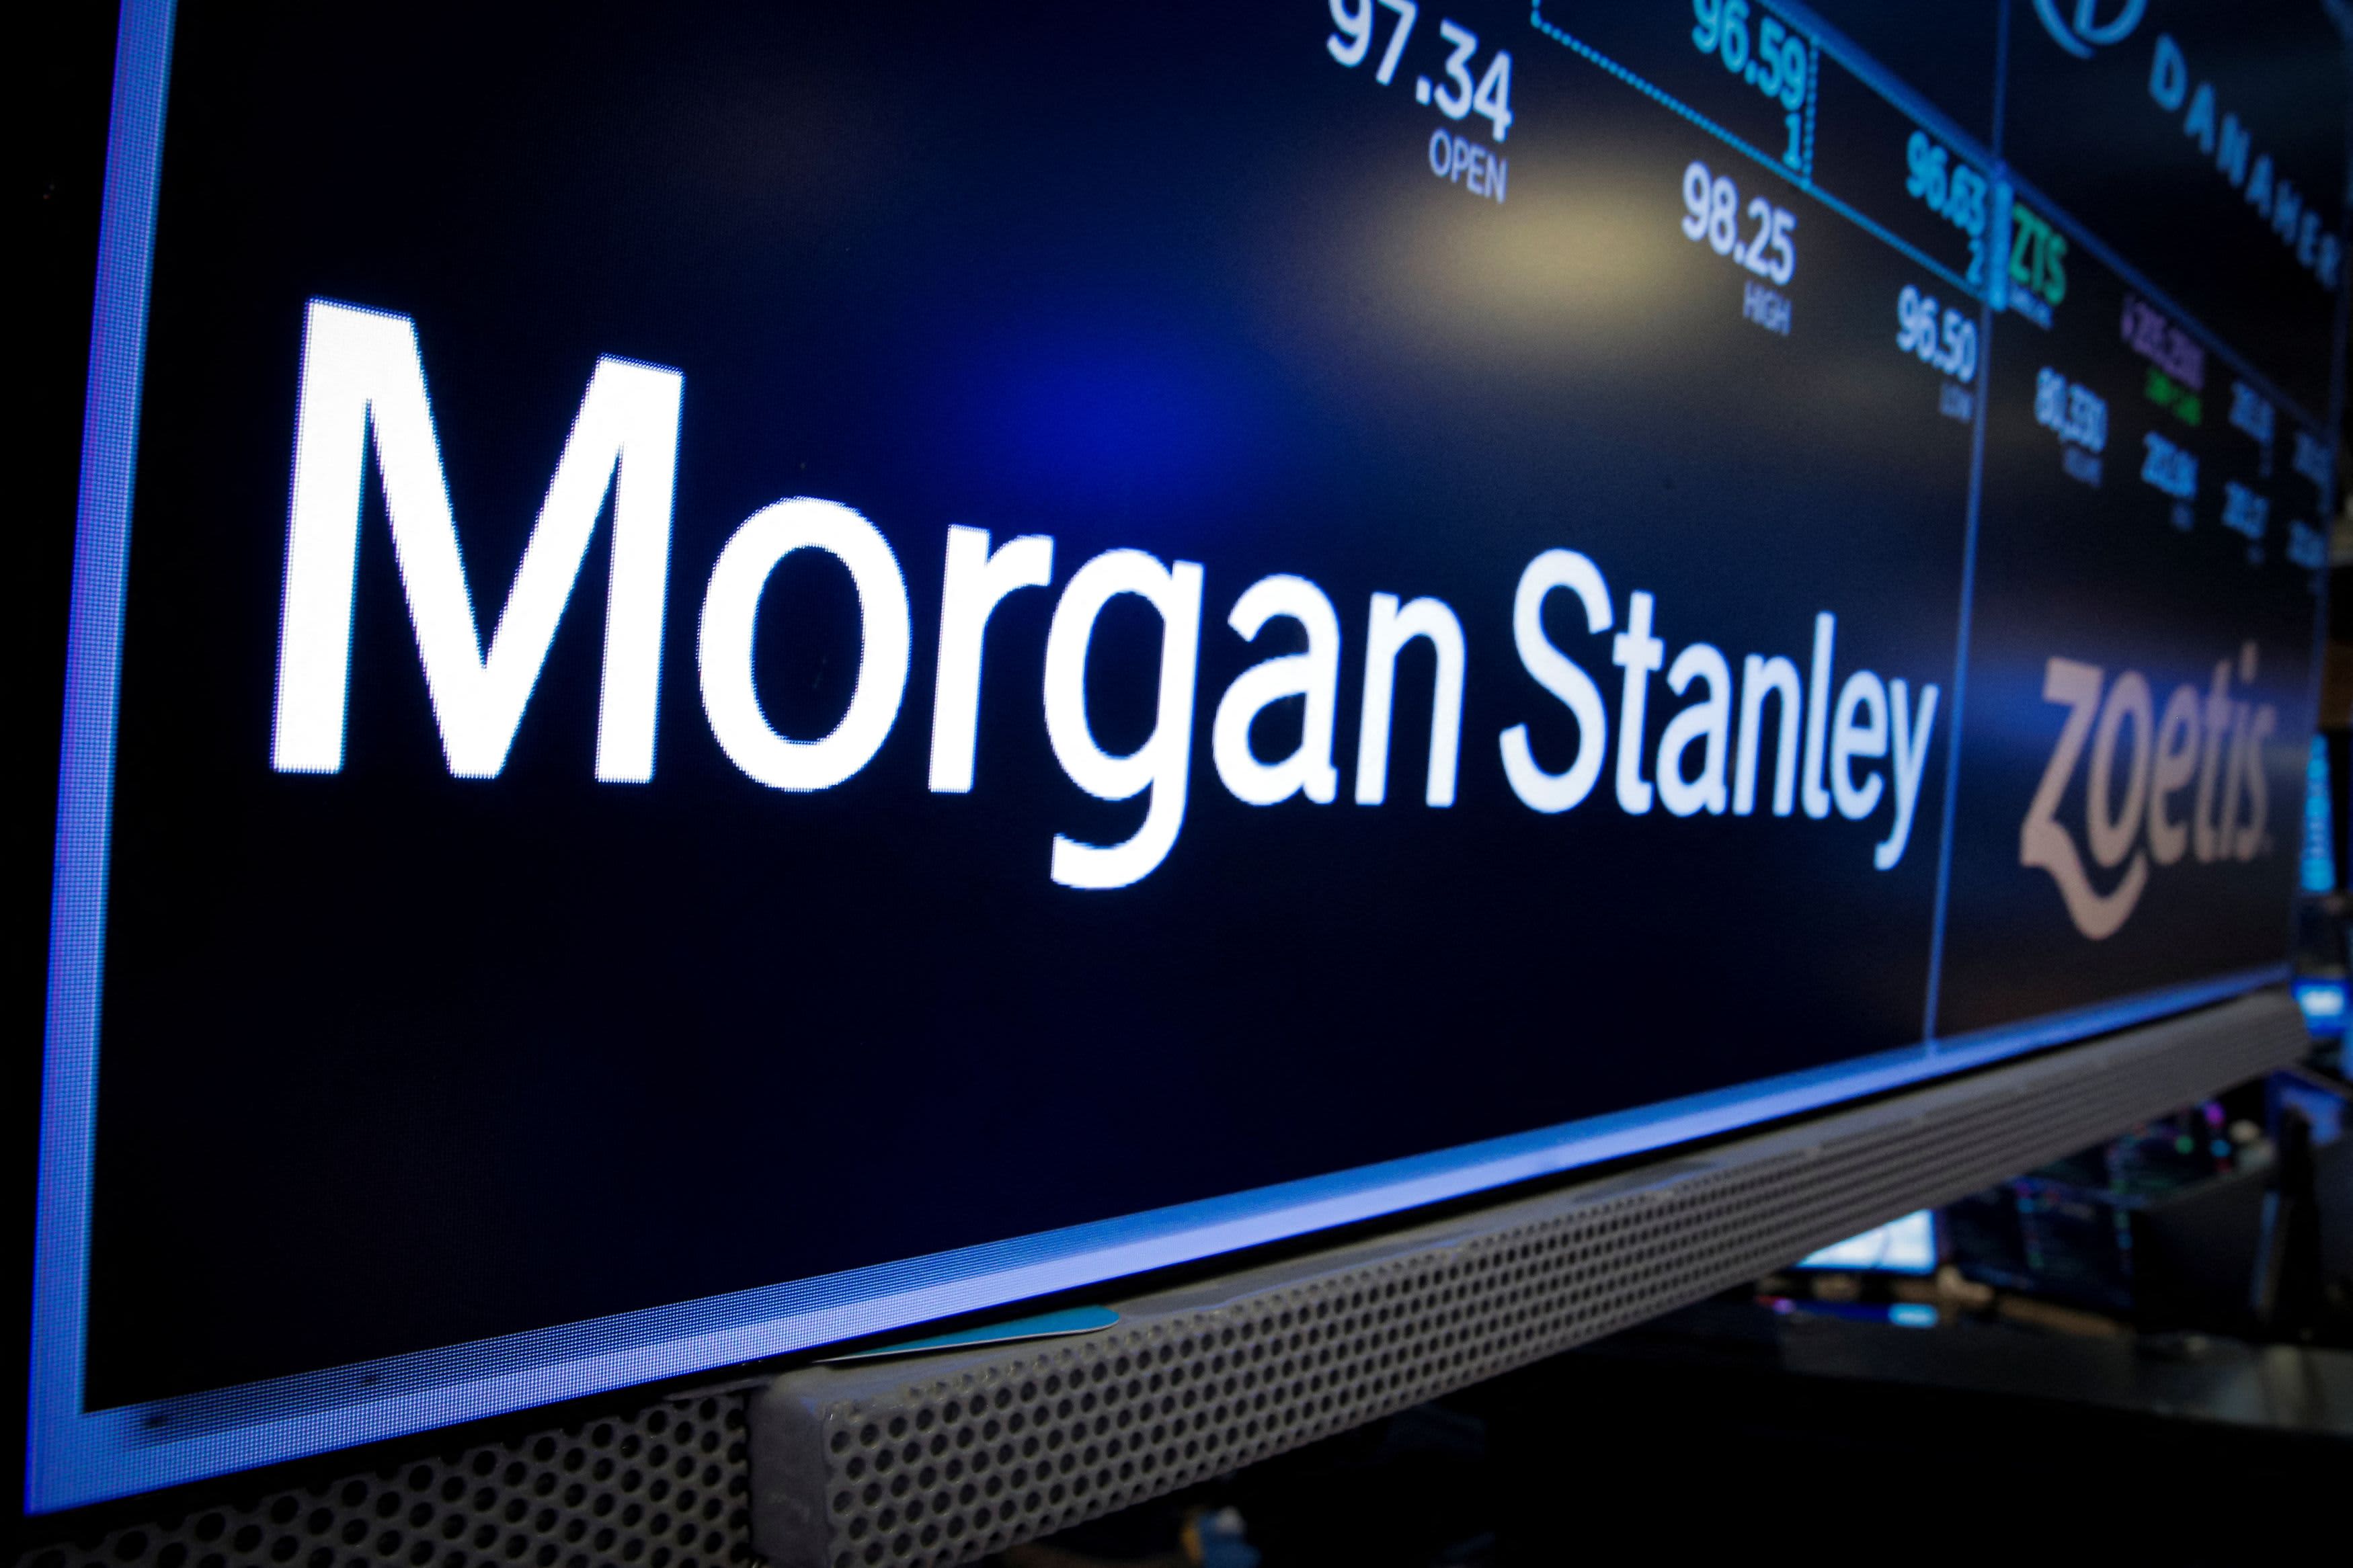 Morgan Stanley says an investment 'boom' is coming to India, and names the stocks to play it